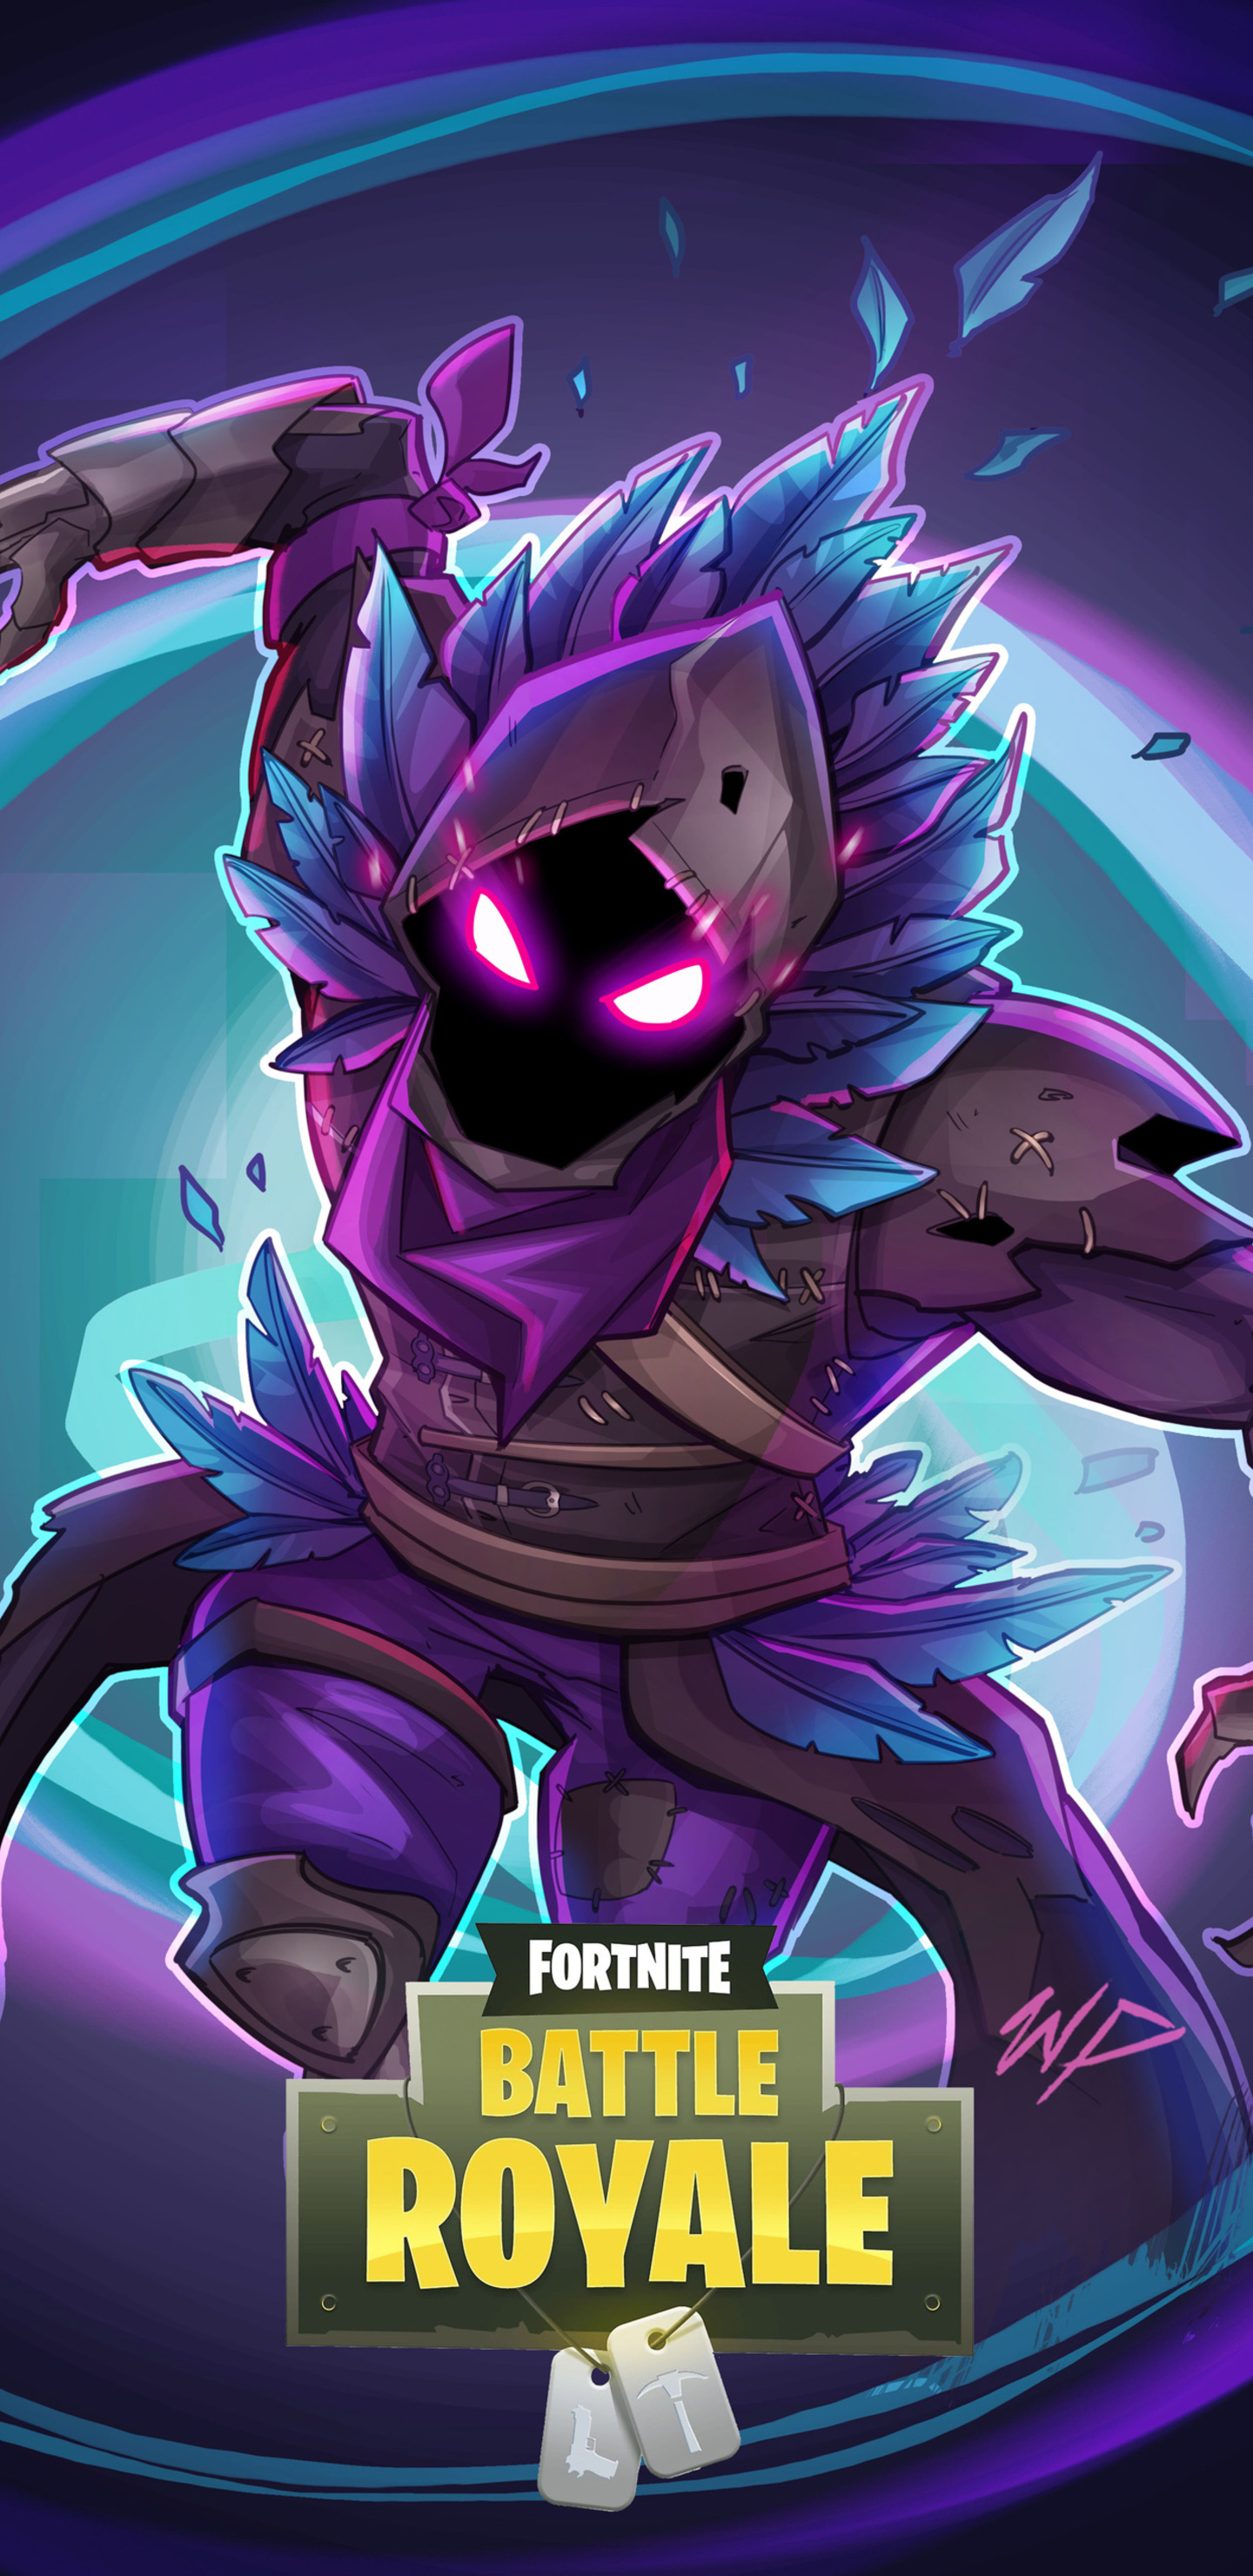 Free Download 1440x2960 Fortnite Raven Fan Art Samsung Galaxy Note 98 S9s8 1440x2960 For Your Desktop Mobile Tablet Explore 22 Galaxy Fortnite Wallpapers Galaxy Fortnite Wallpapers Galaxy Skin Fortnite